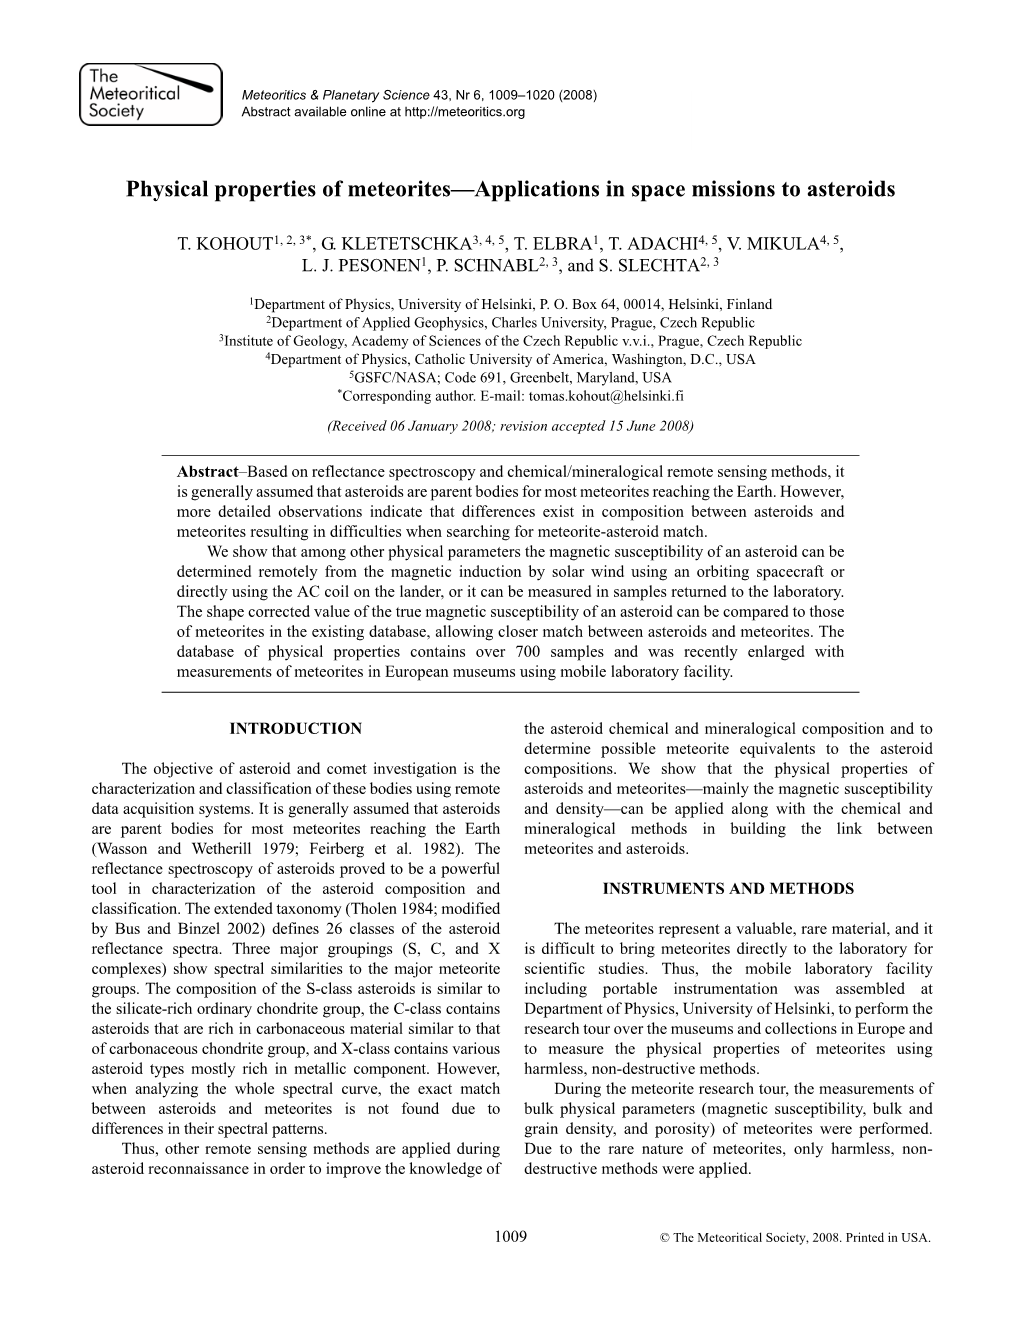 Physical Properties of Meteorites—Applications in Space Missions to Asteroids